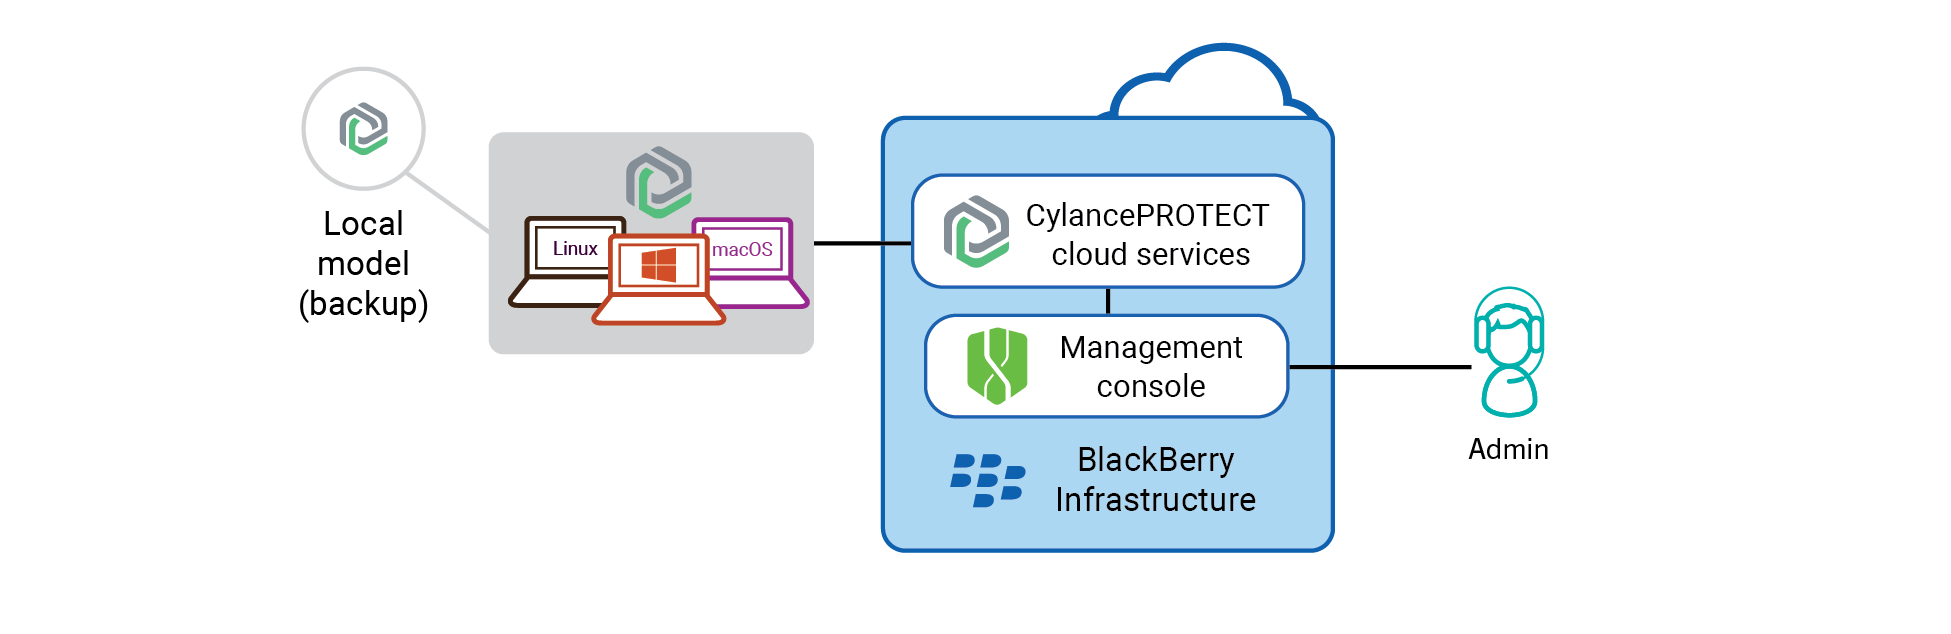 The components of the CylancePROTECT Desktop solution